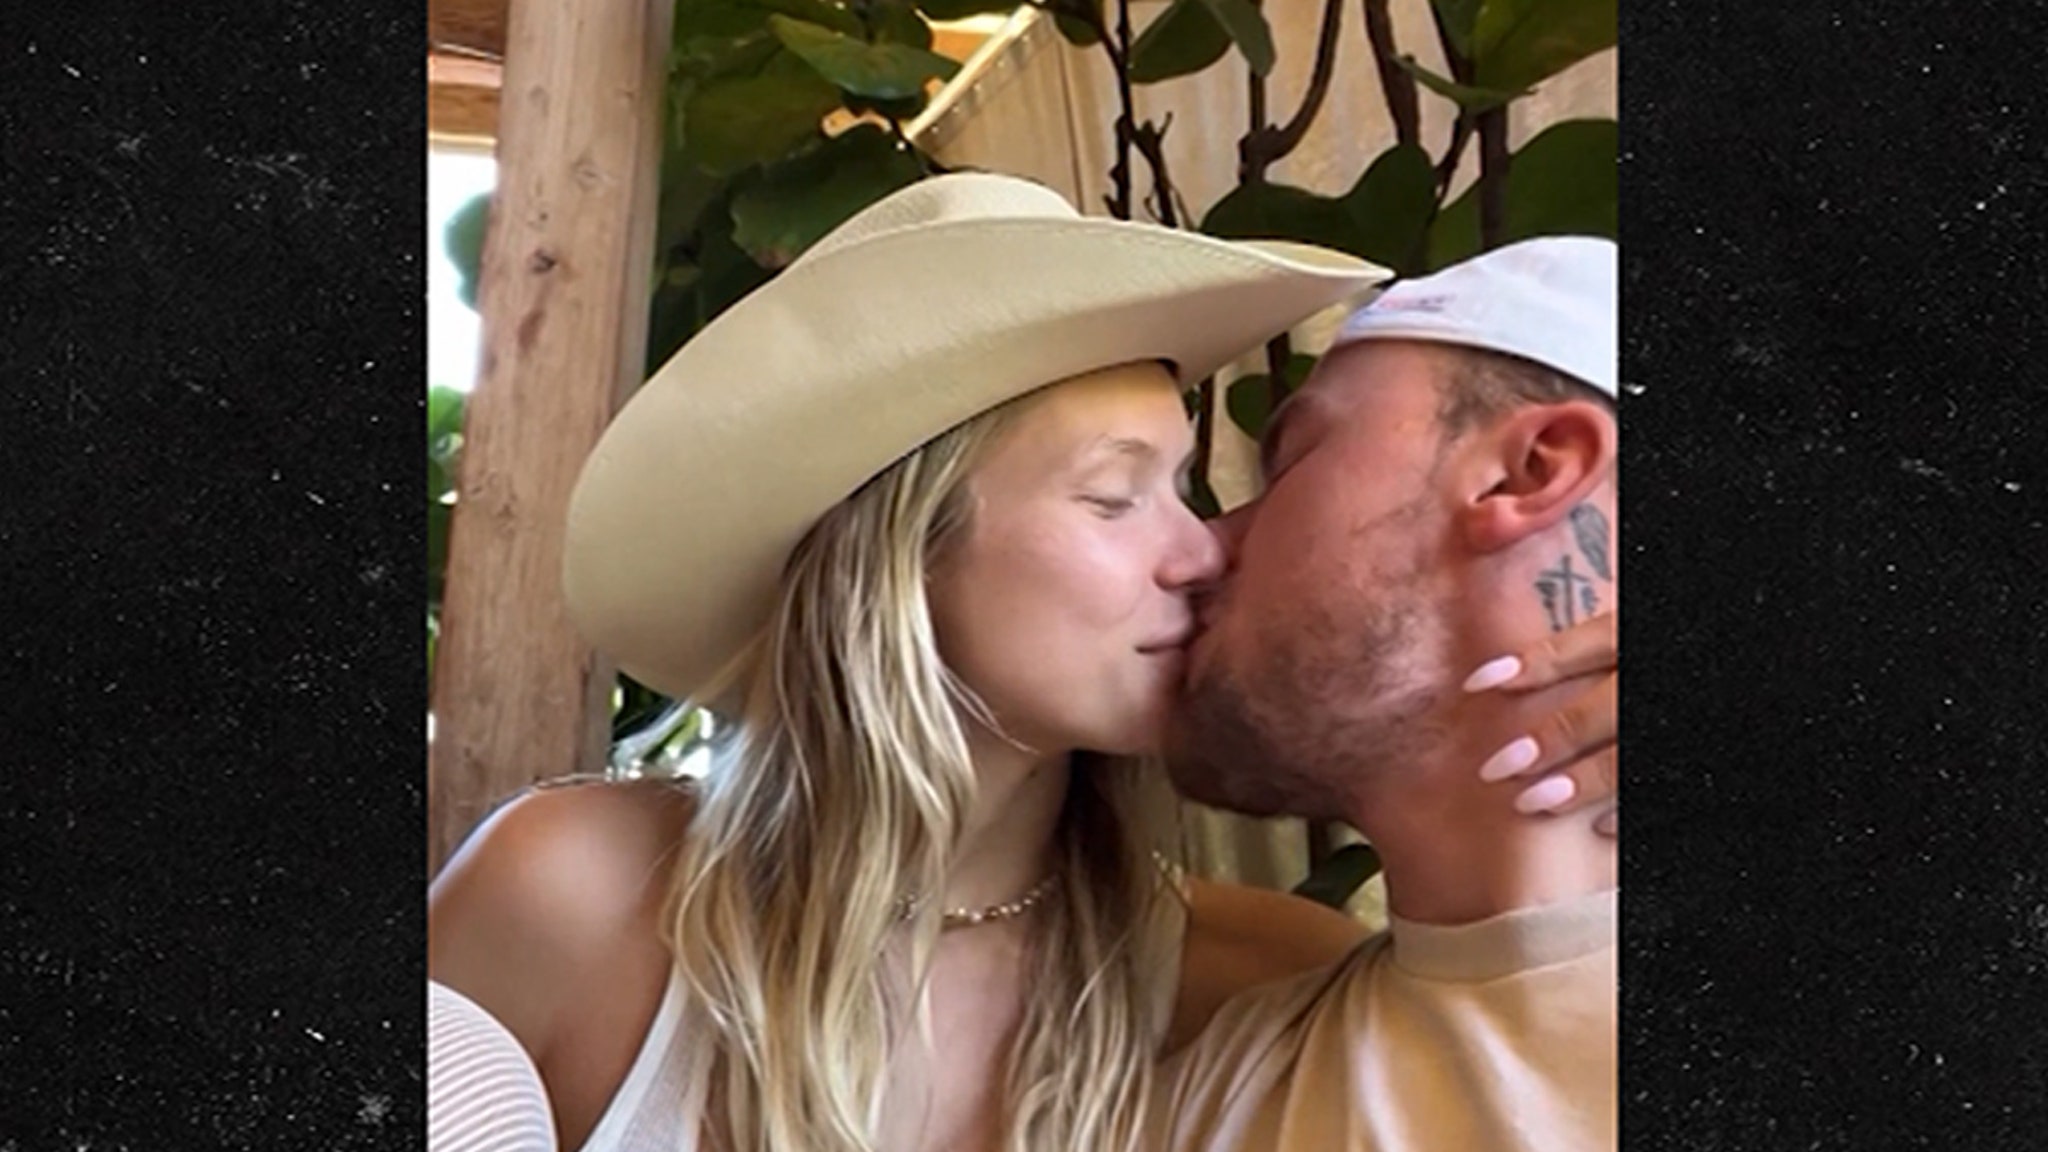 Johnny Manziel Shares Kiss With Josie Canseco, Drops L-Bomb?